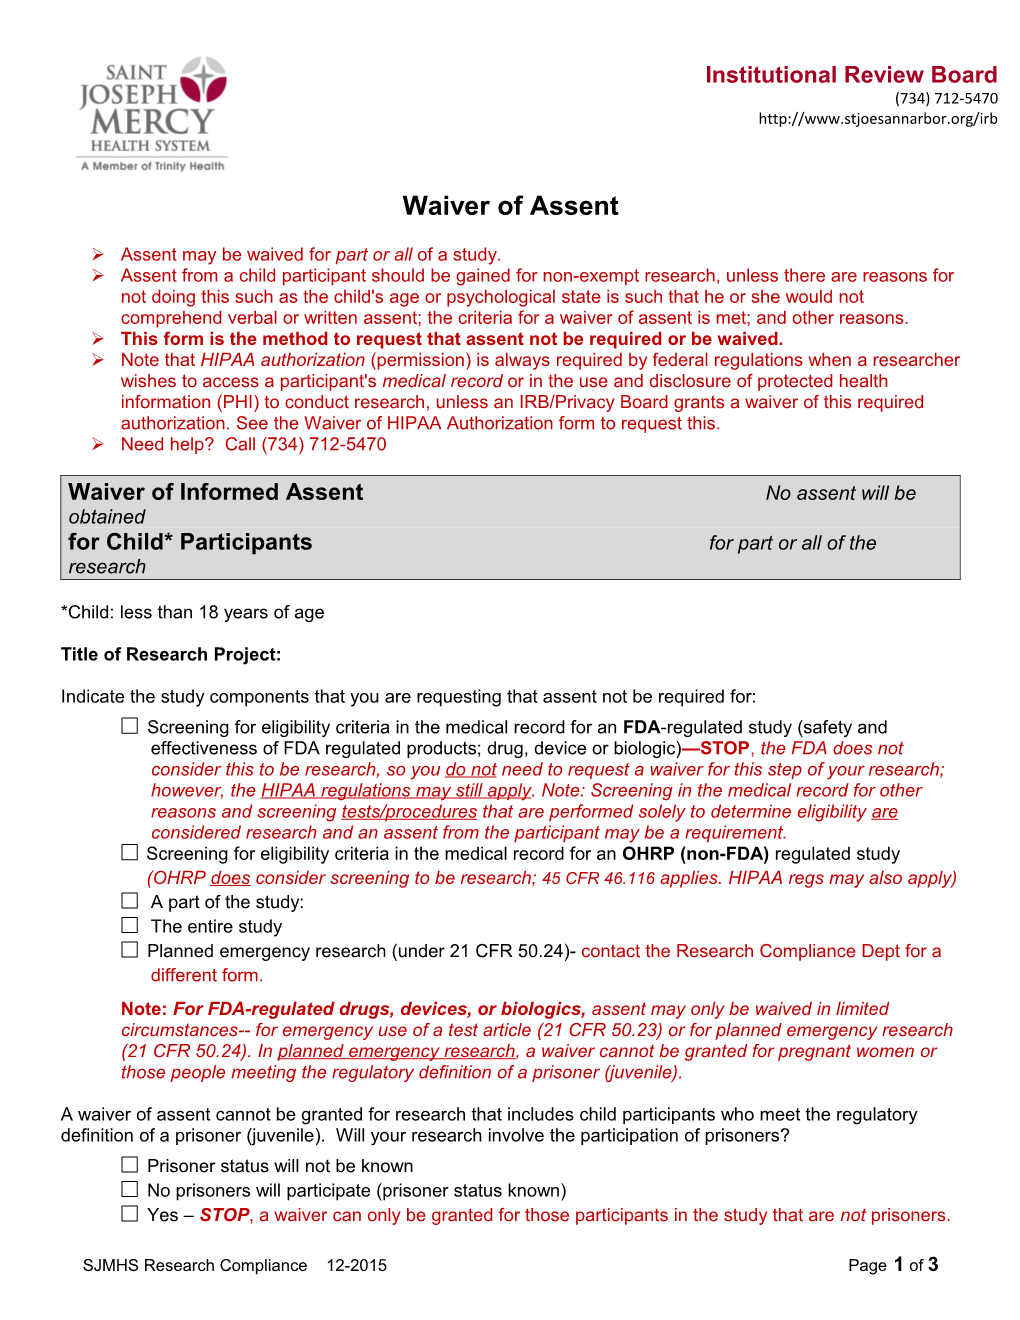 Waiver of Assent